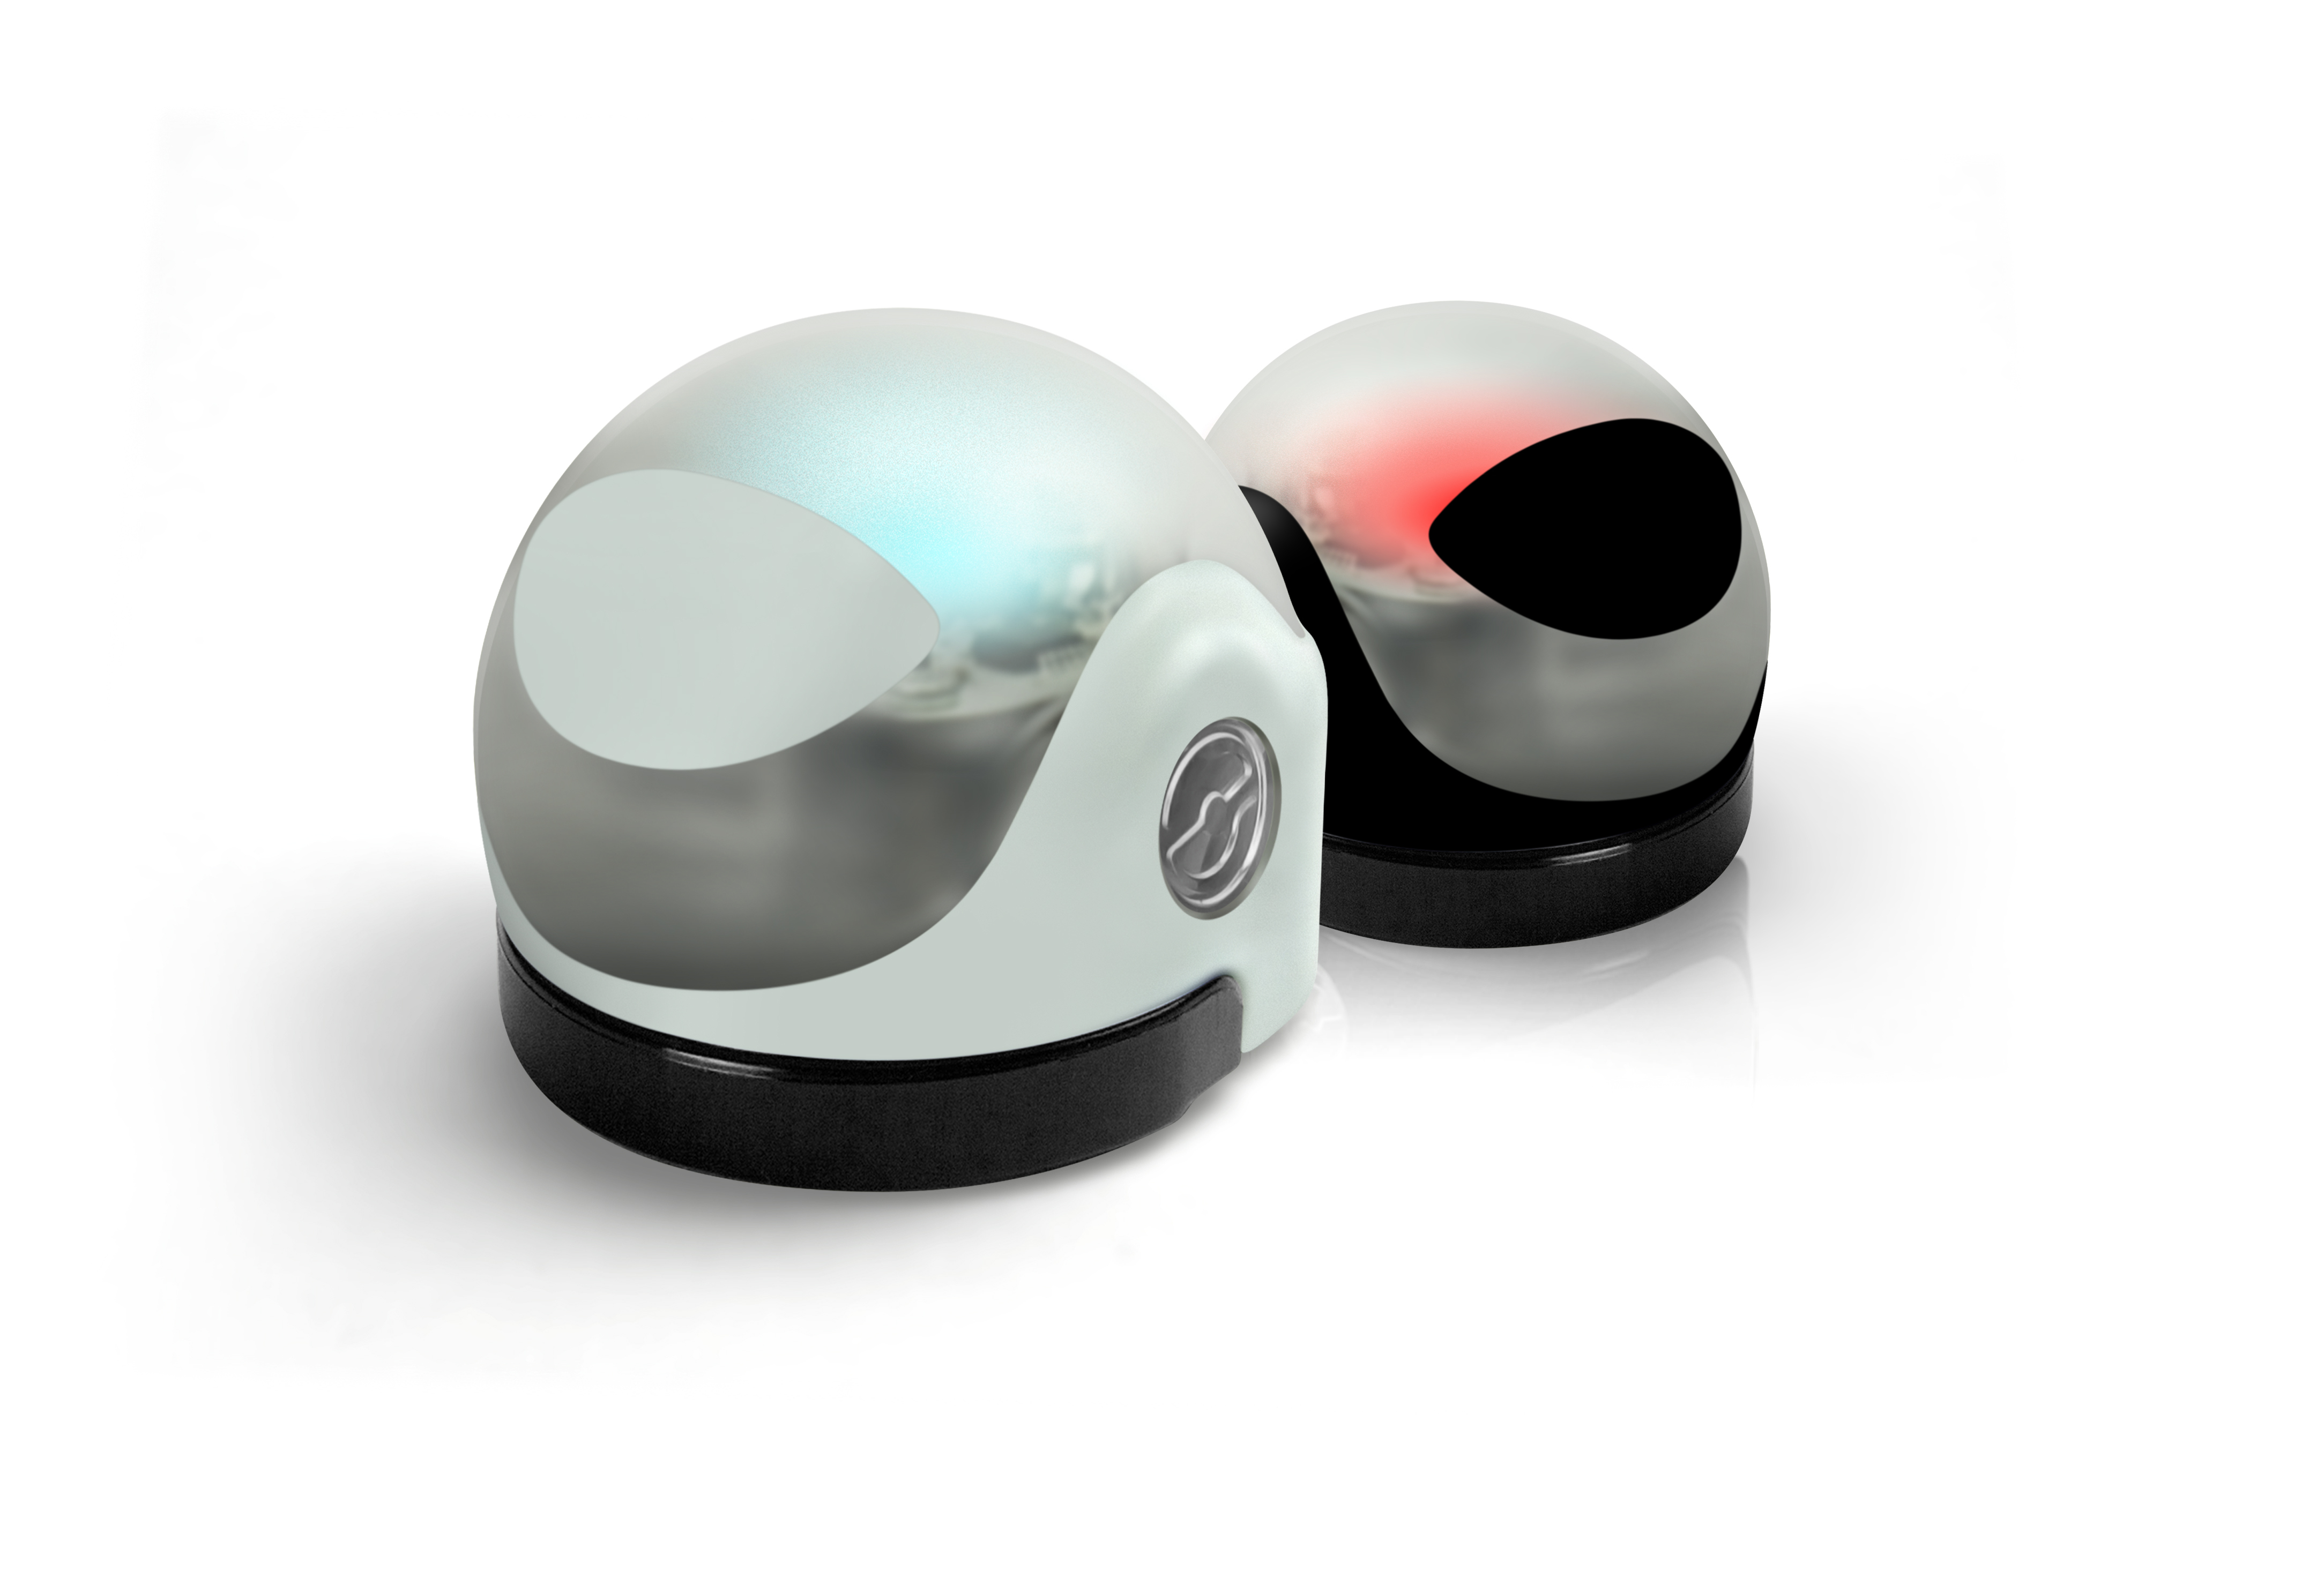 Ozobot's Evo is a smarter, more social coding robot